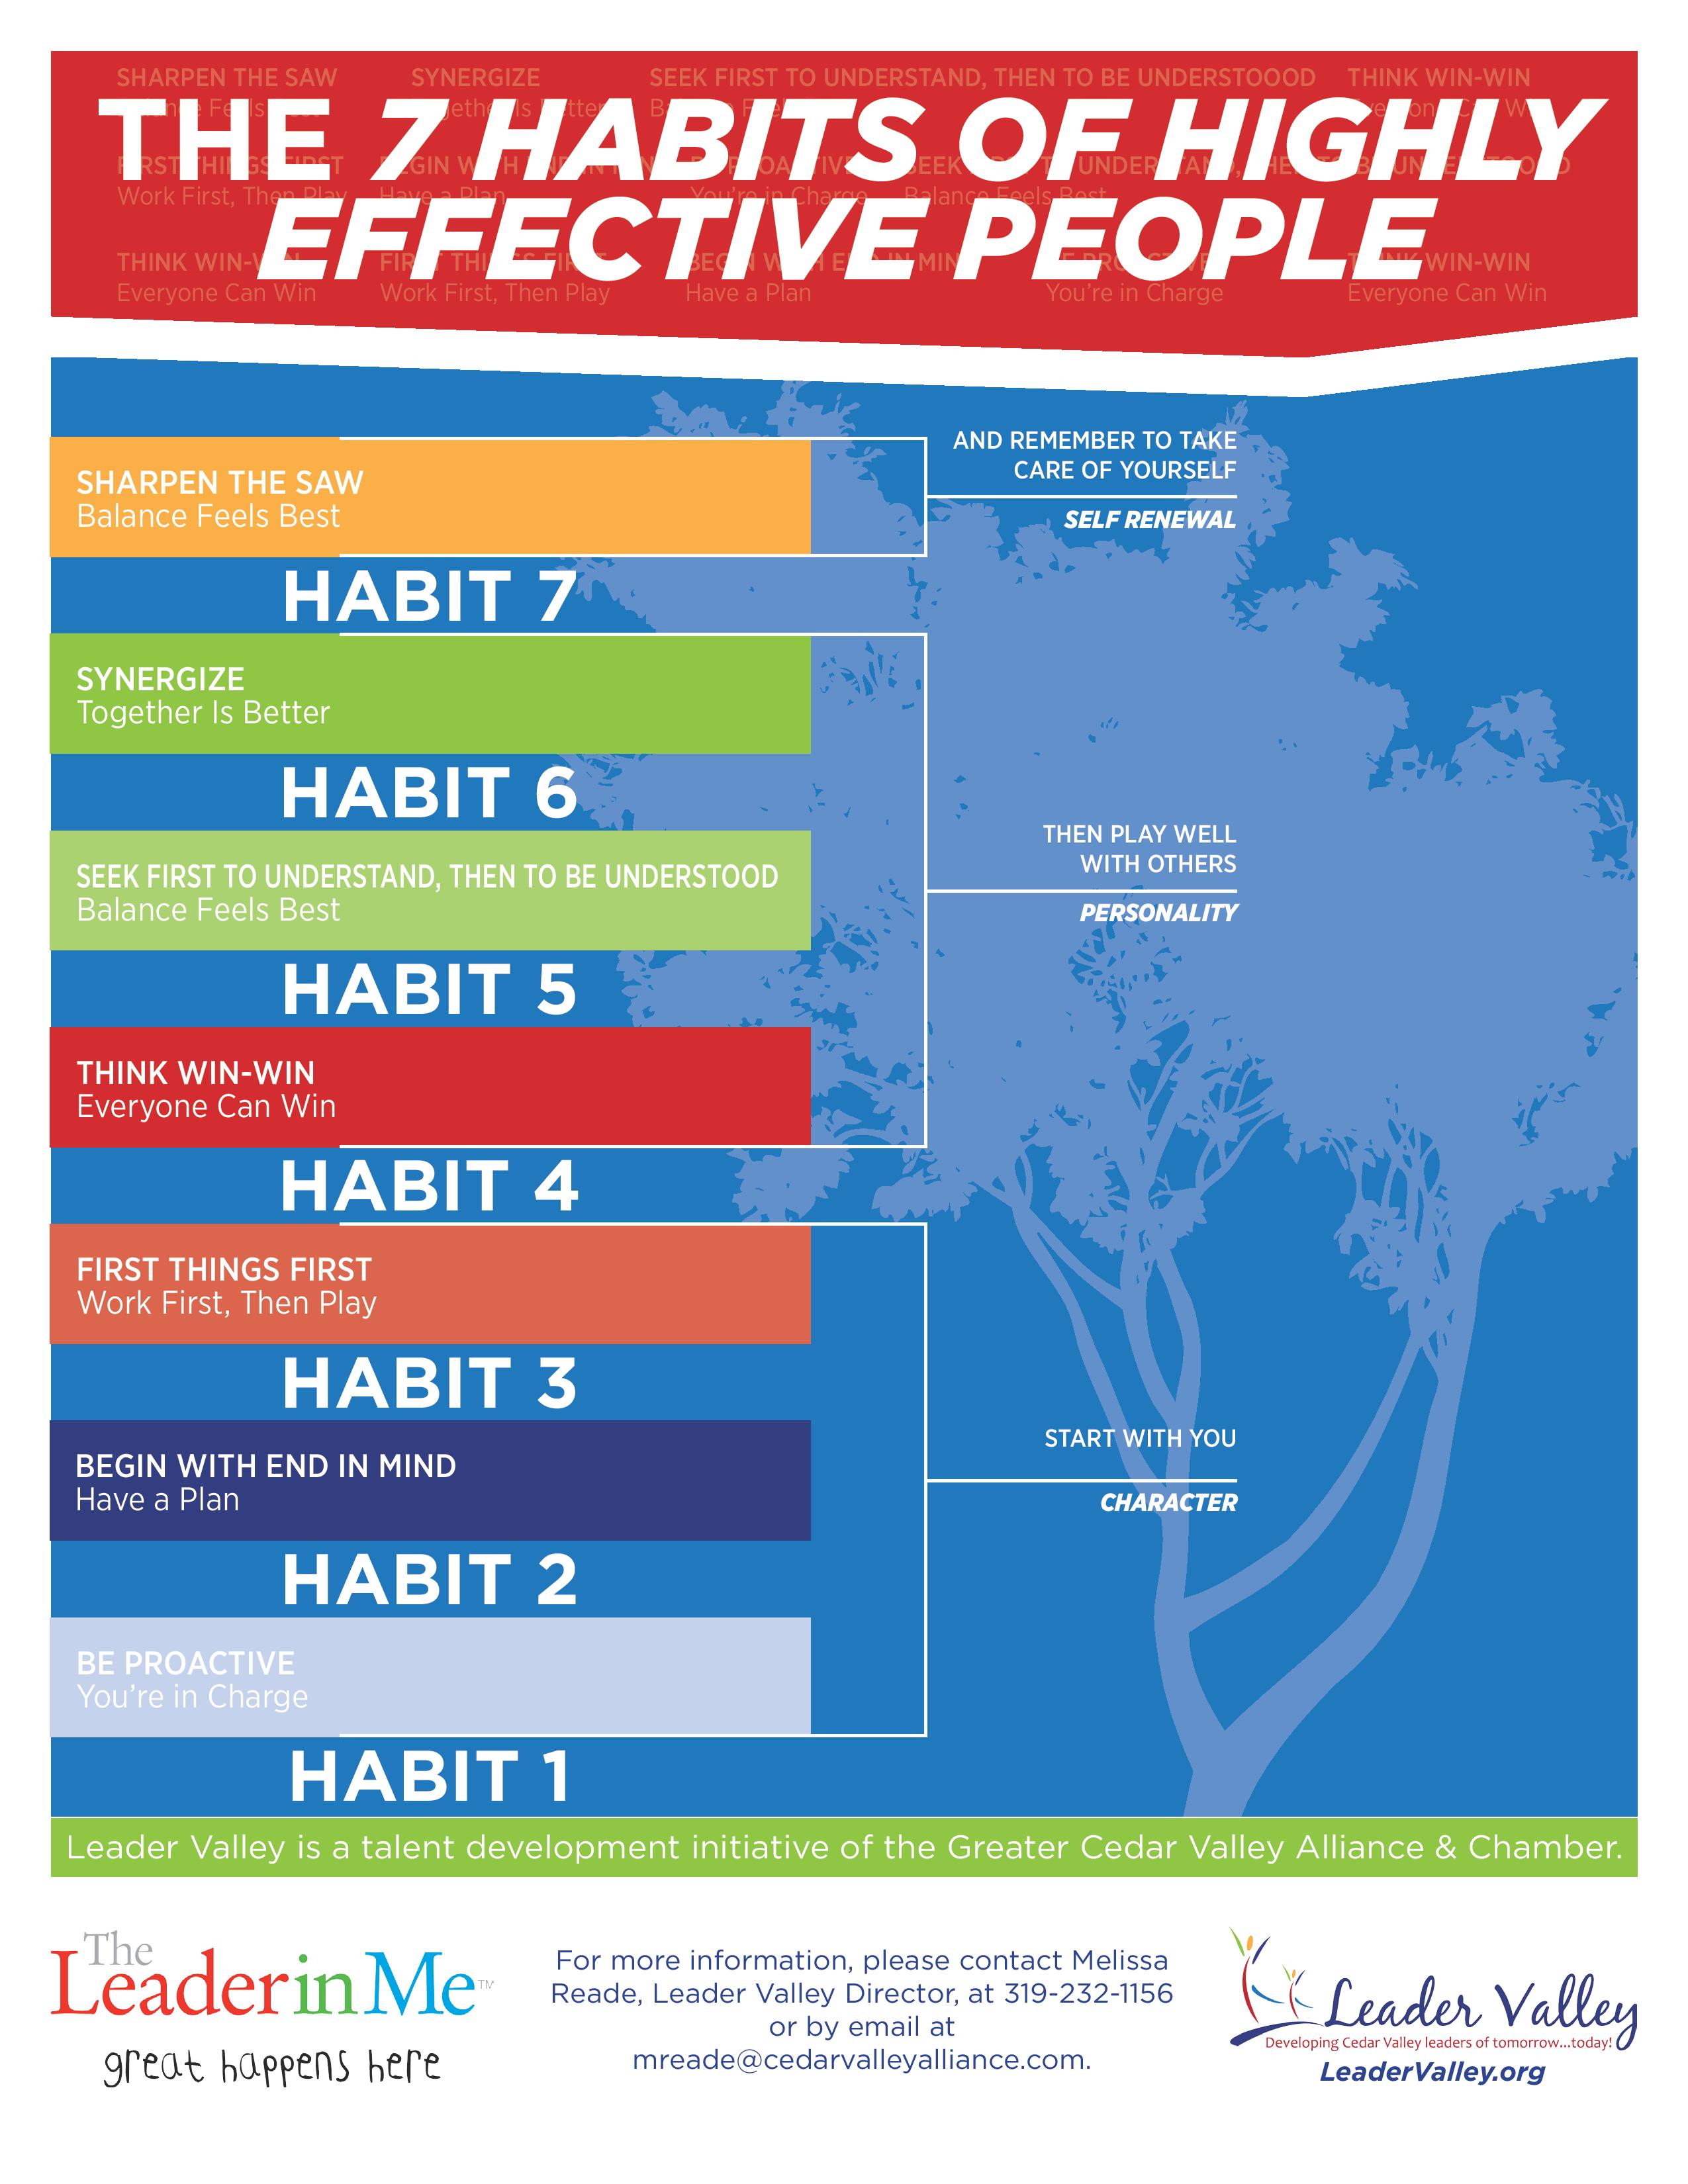 7 Habits of Highly Effective People Tree